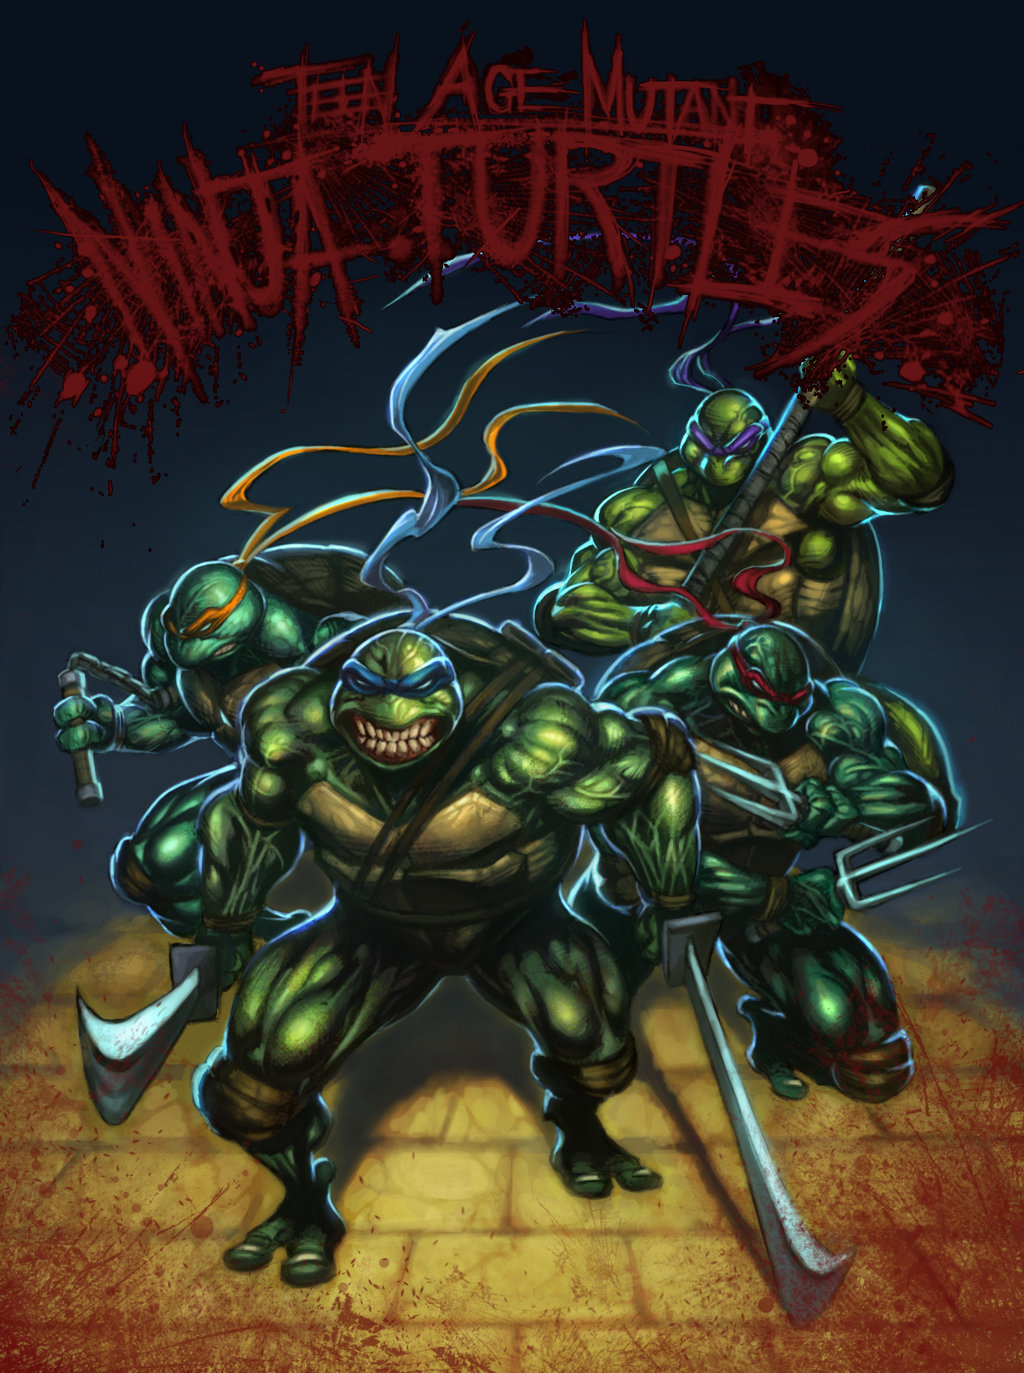 https://static.wikia.nocookie.net/fiction1/images/4/44/2709027-tmnt_by_heewonlee_d3a0h1x.jpg/revision/latest?cb=20140823132903